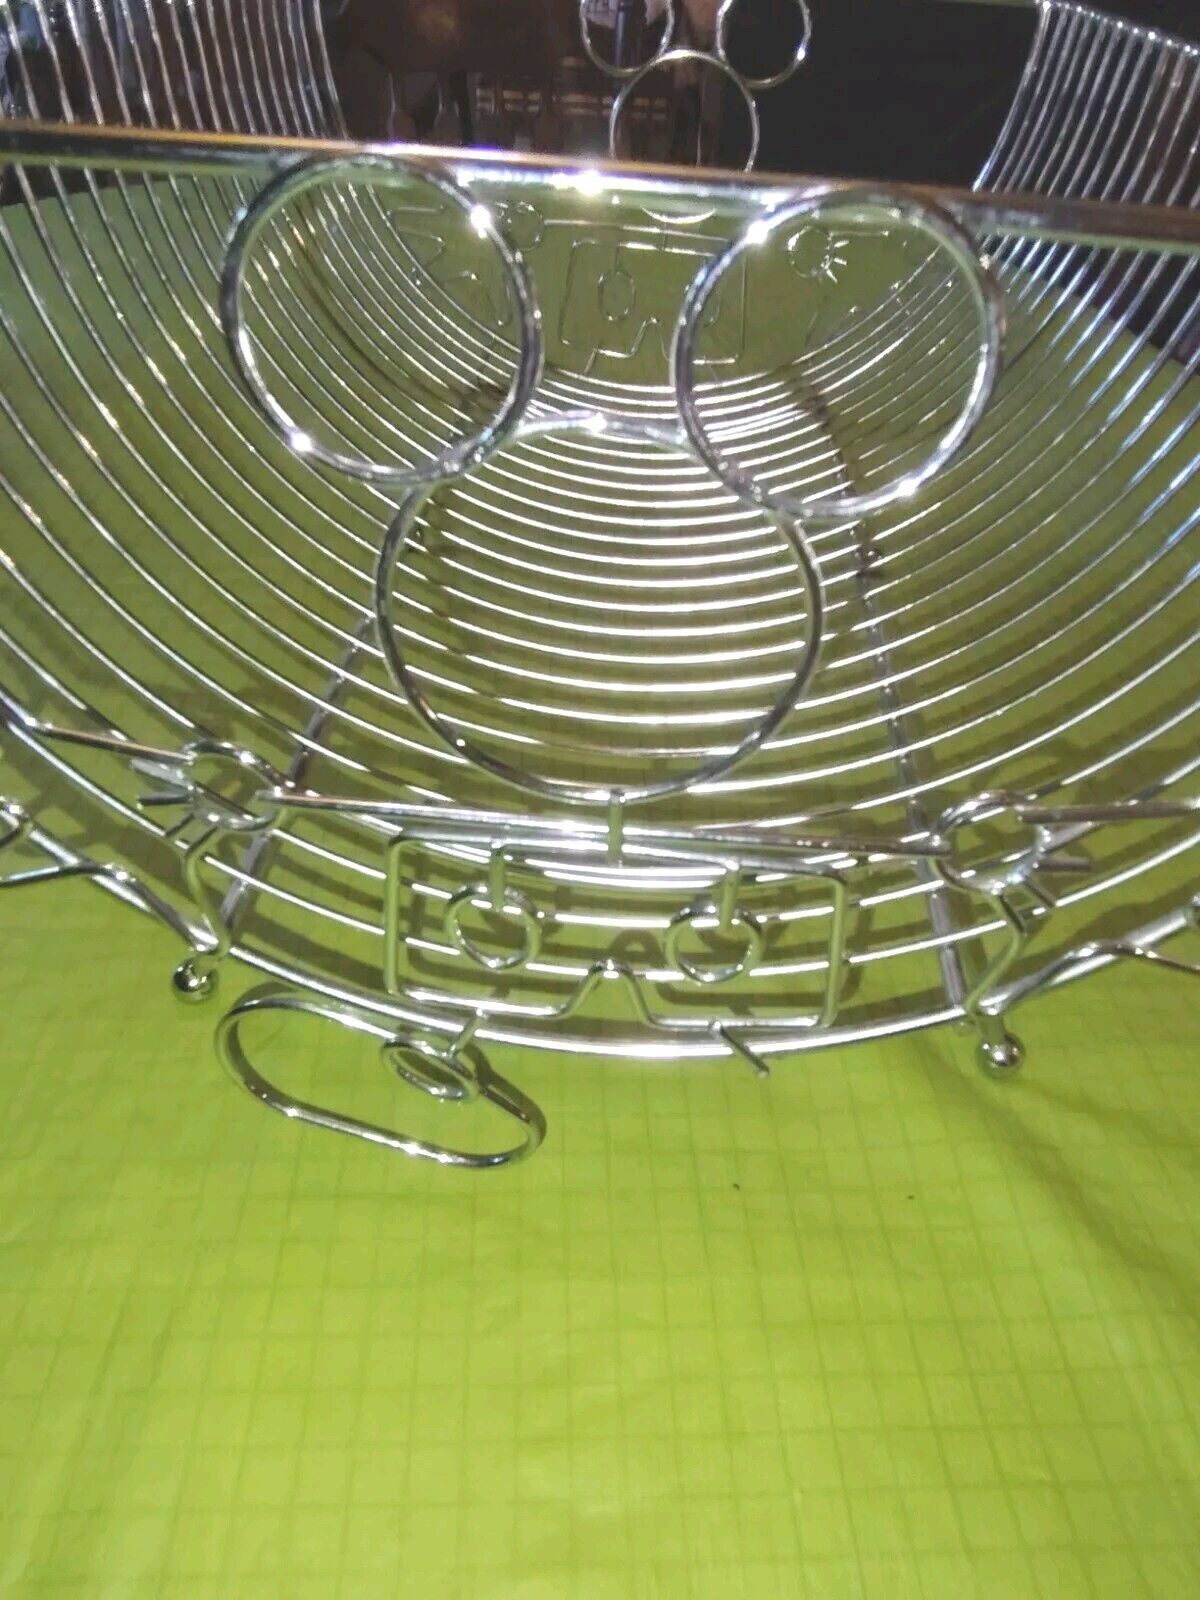 Disney Vintage Mickey Mouse Dish Rack Outline Wire Metal Chrome Finish